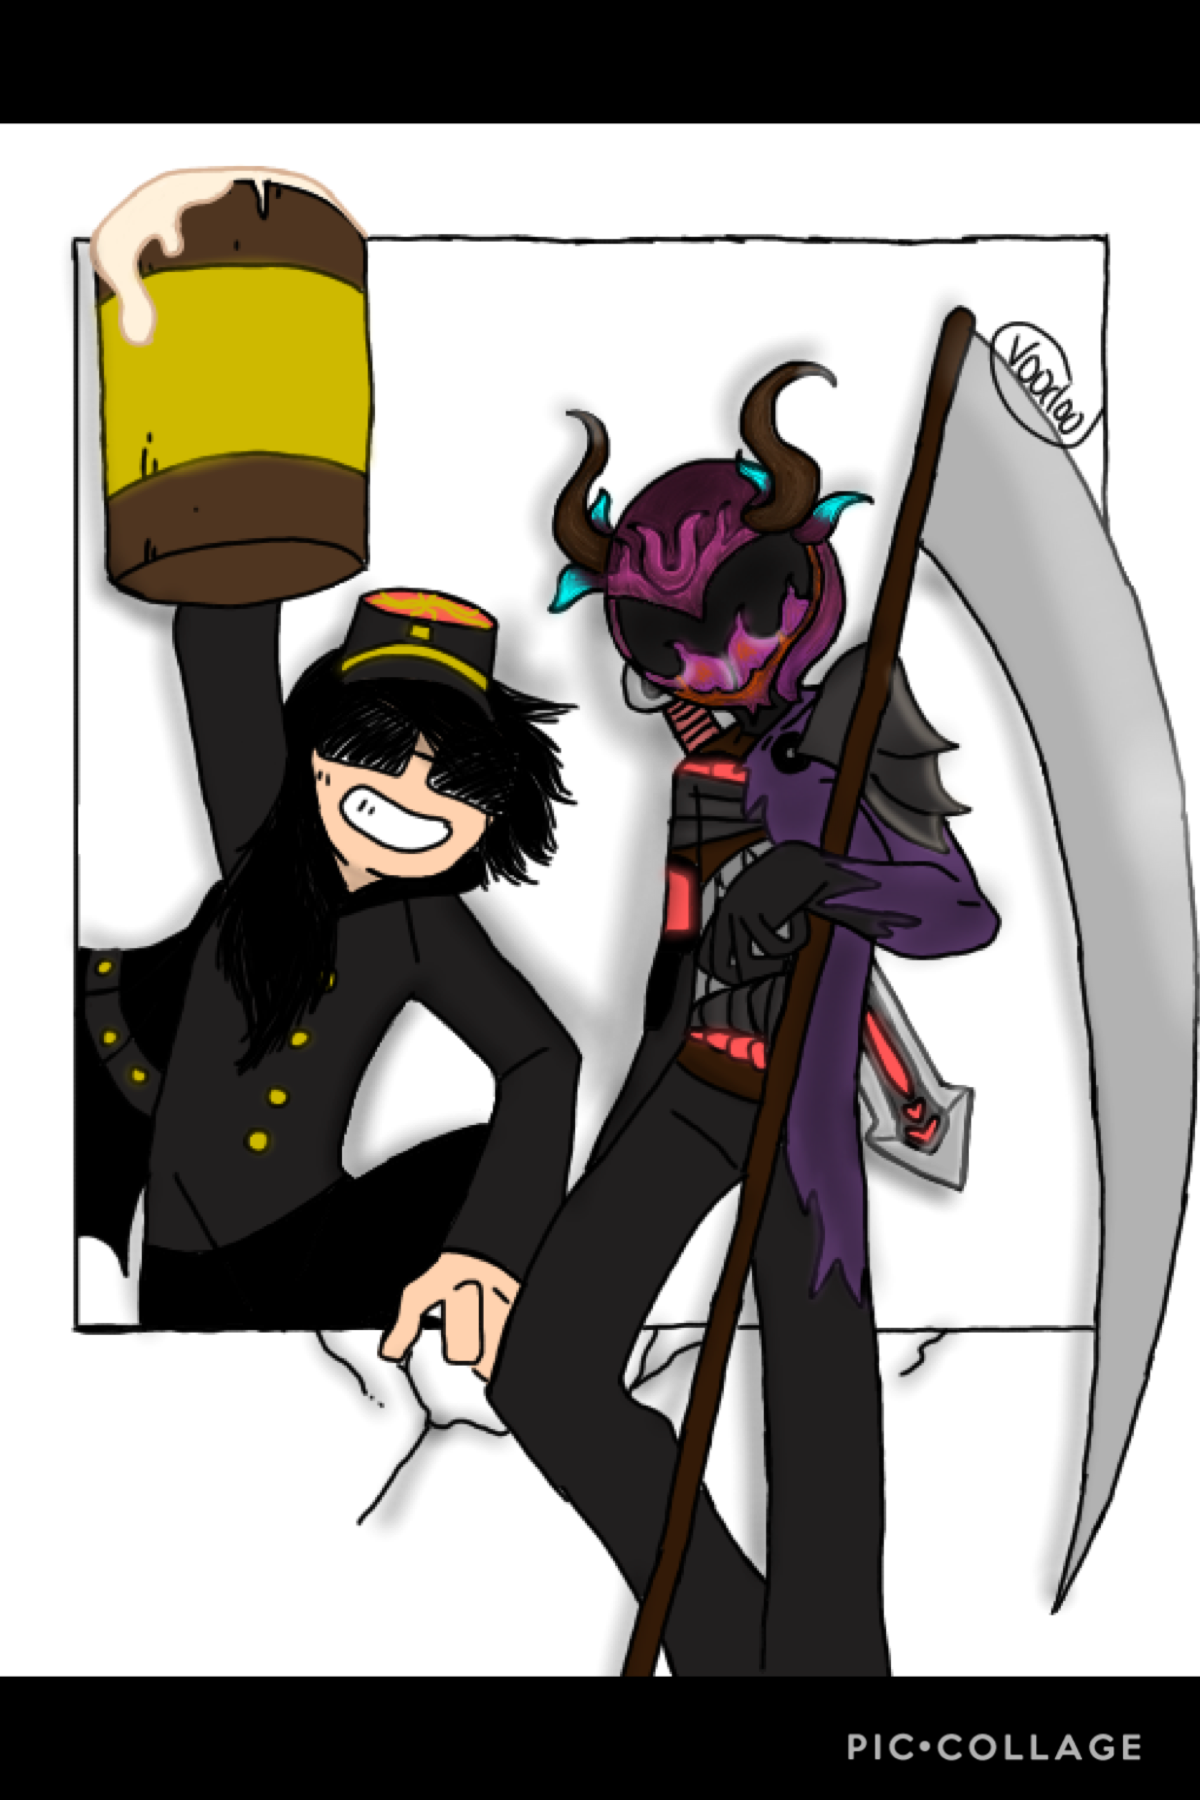 Last drawing of the year! Tap-
This is my Roblox avatar (right) and my friends Roblox avatar (left) I’ll try to find my first drawing of the year. Happy New Years! 